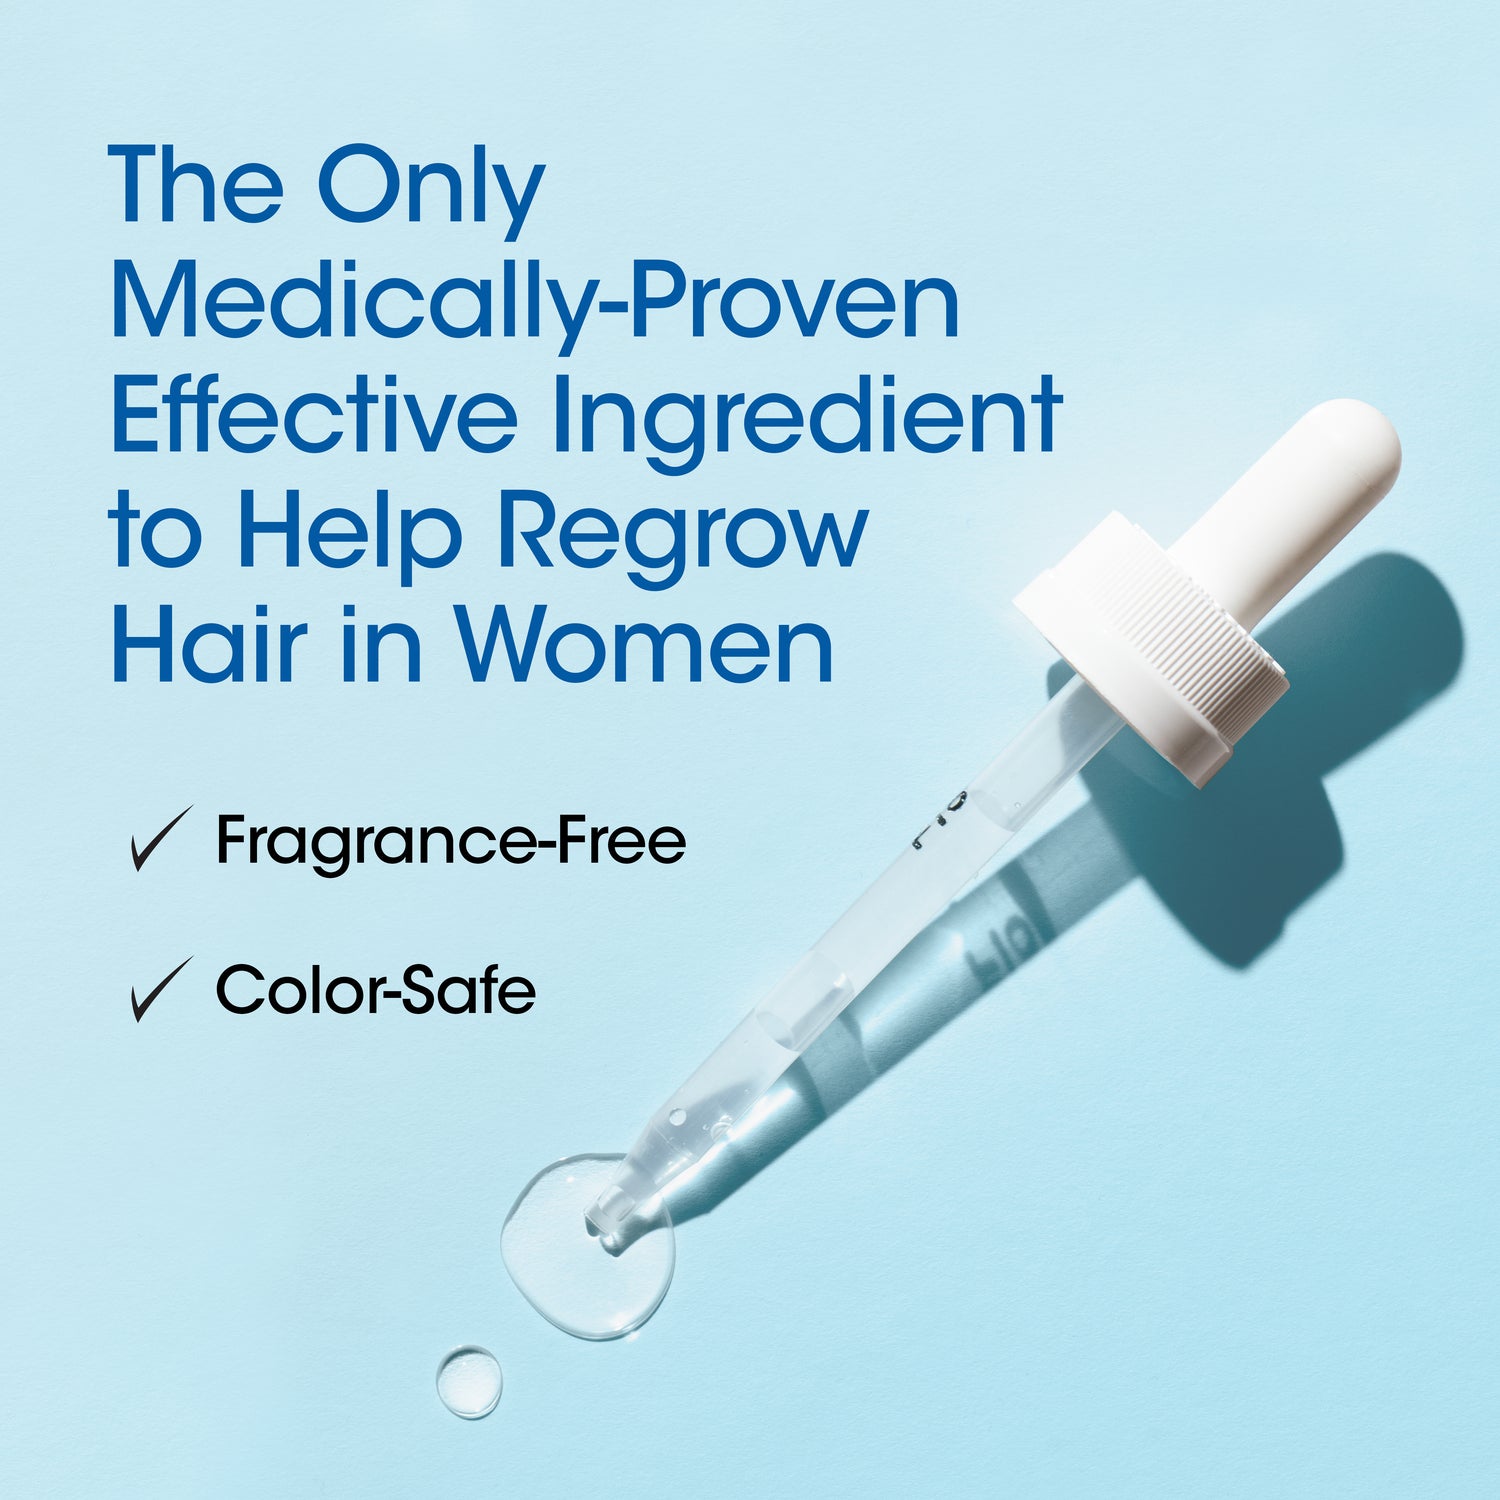 The only medically proven effective ingredient to help regrow hair in women. Fragrance-free and color-safe. 